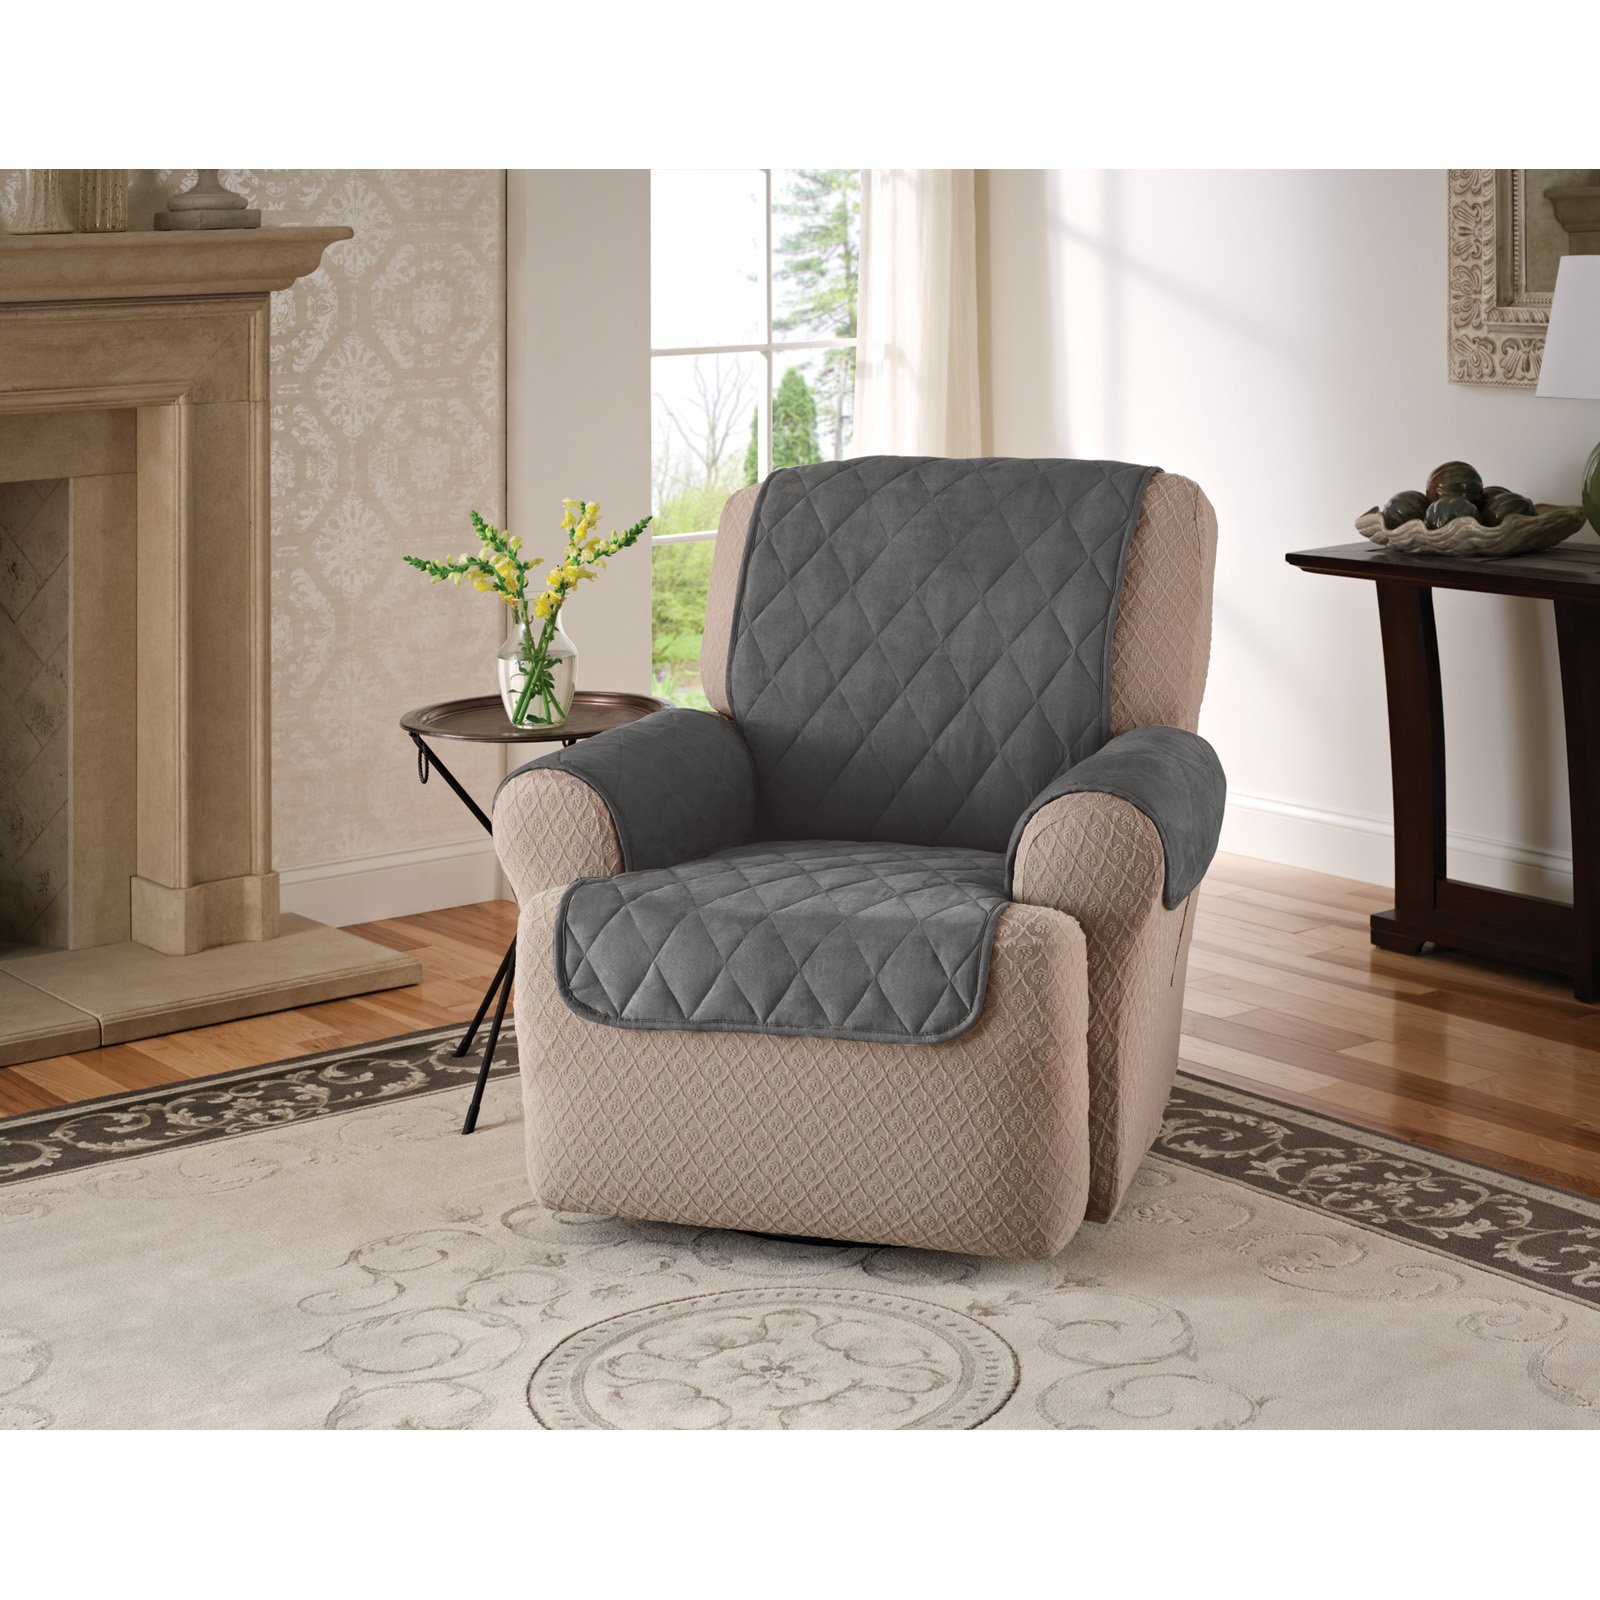 Innovative Textile Solutions 1-Piece Faux Suede Recliner/Wing Chair Furniture Cover Slipcover, Grey - image 1 of 2